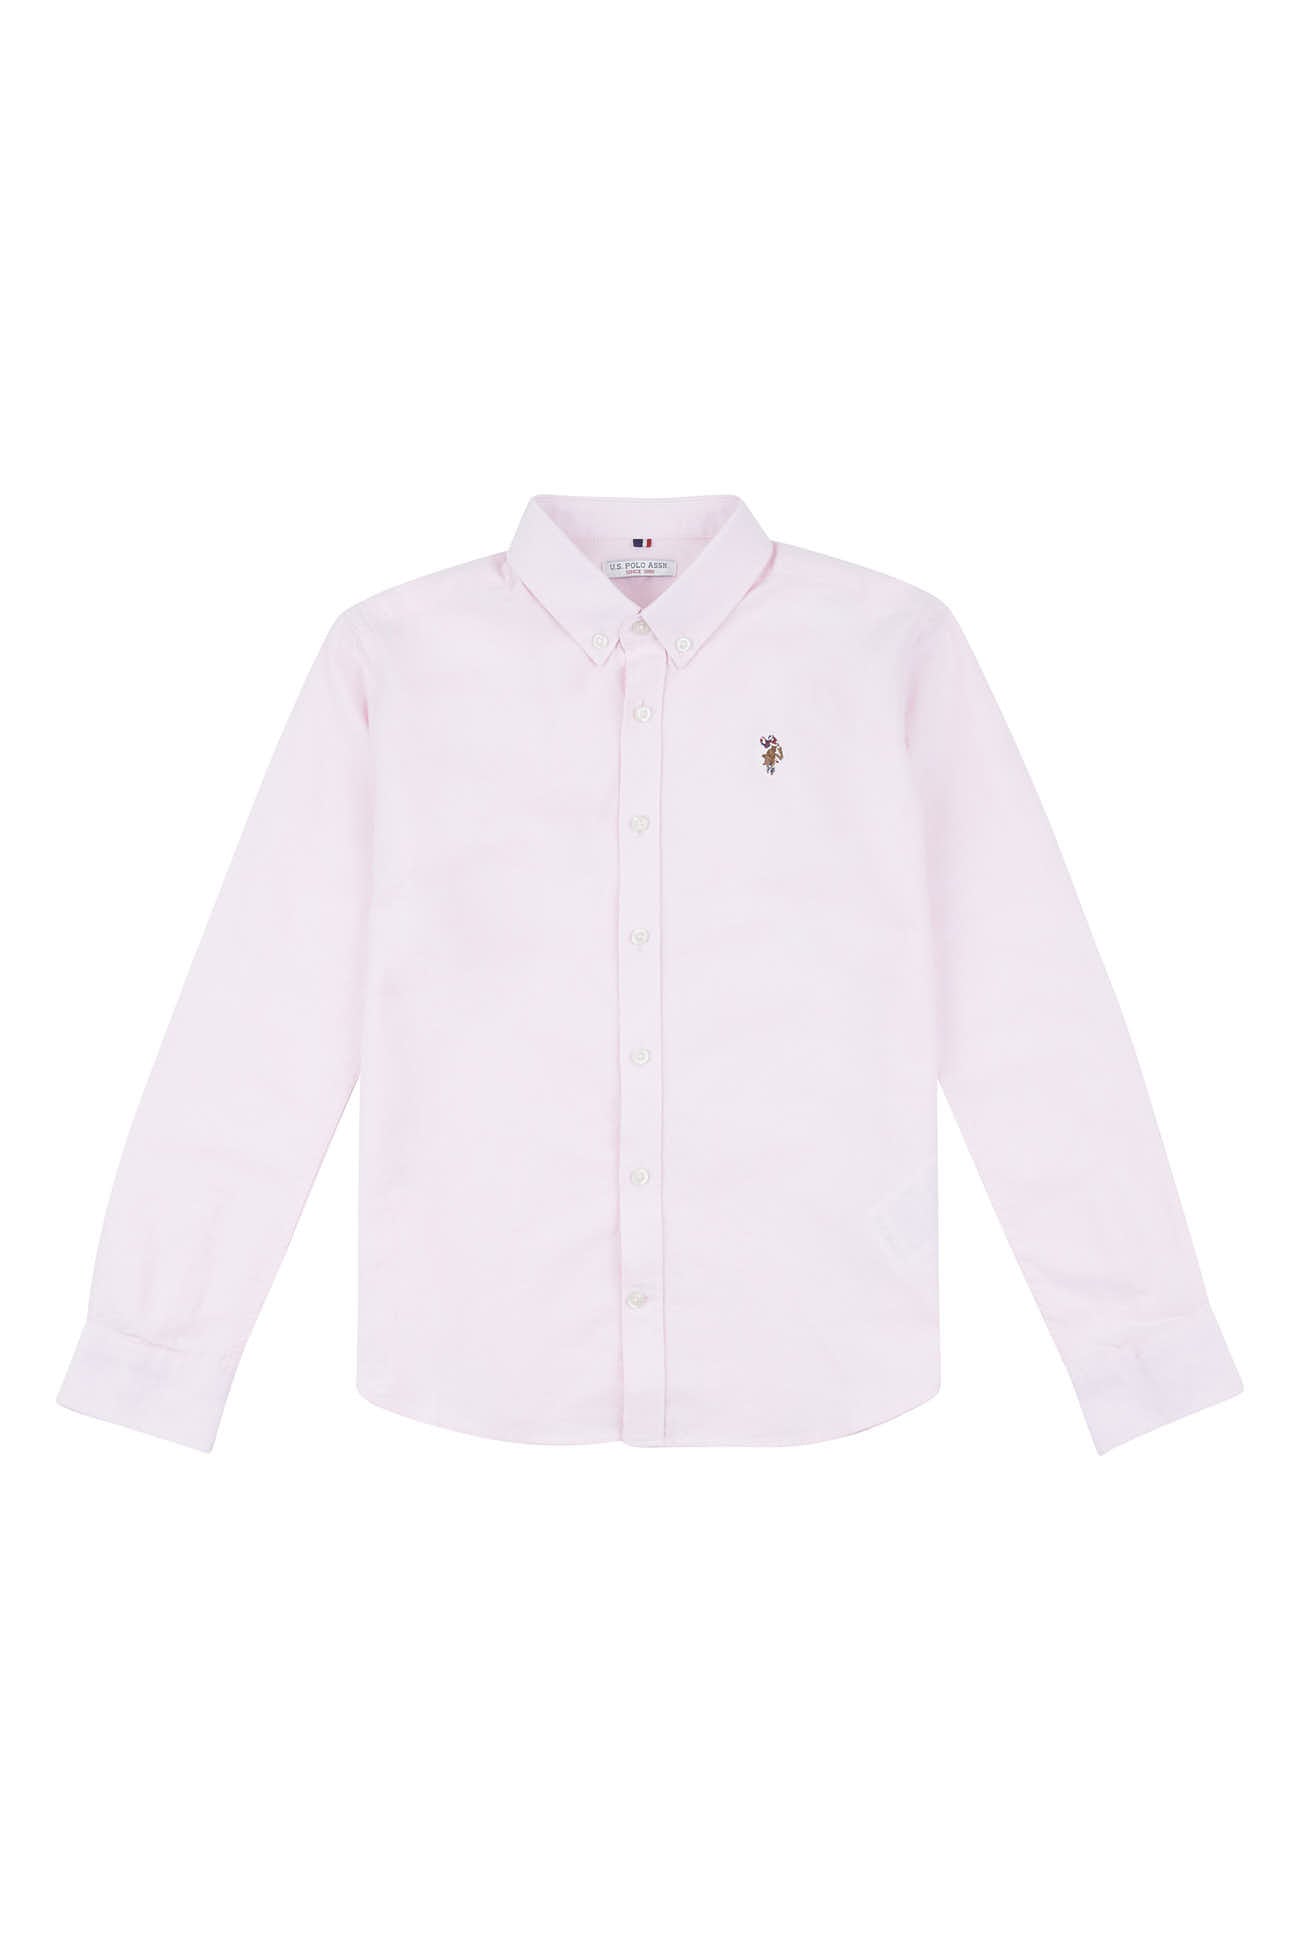 U.S. Polo Assn. Boys Lifestyle Peached Oxford Shirt in Orchid Pink